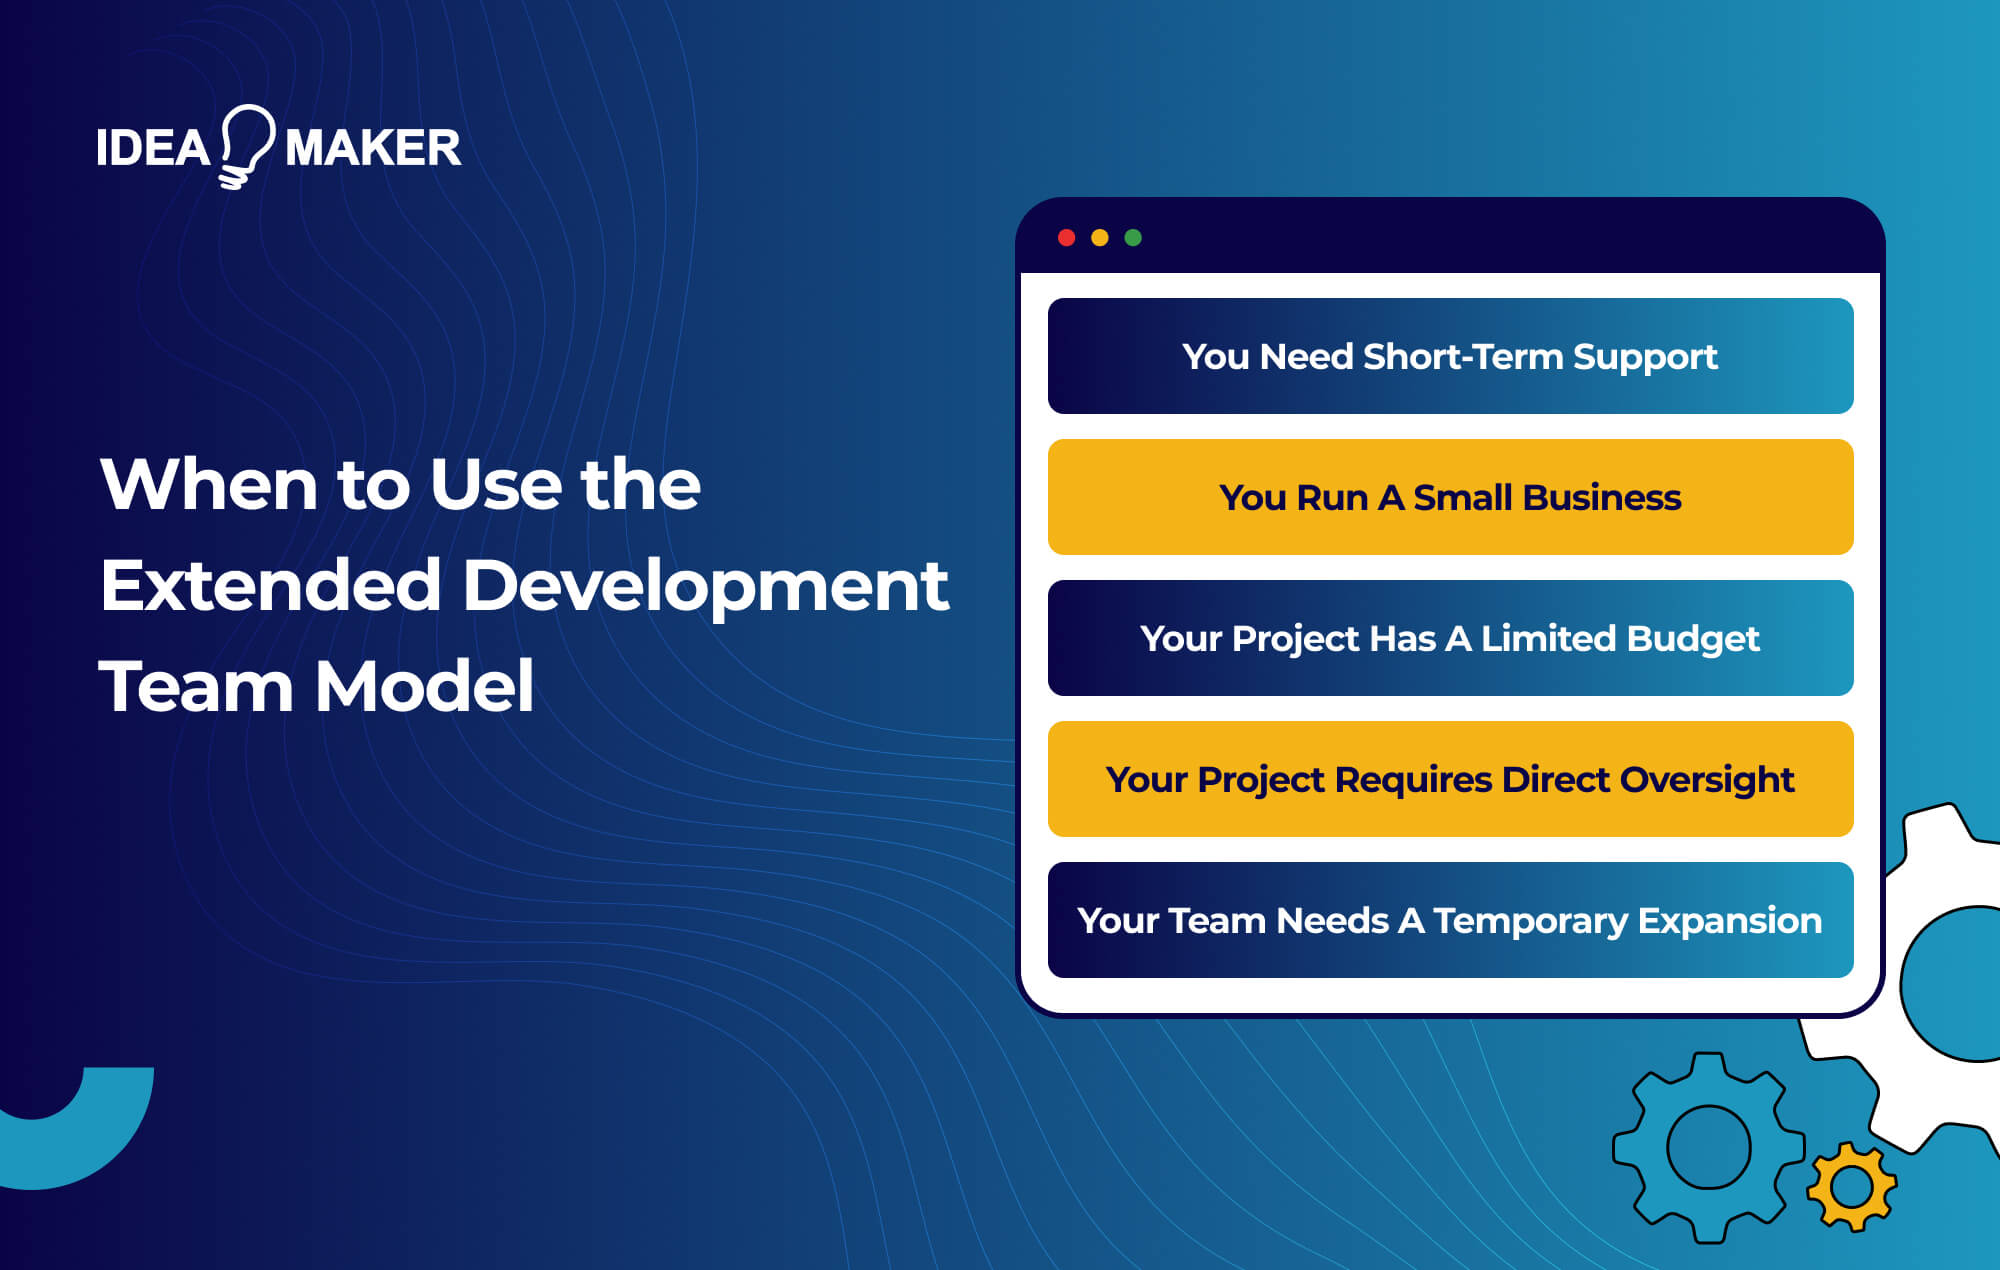 Ideamaker - When to Use the Extended Development Team Model